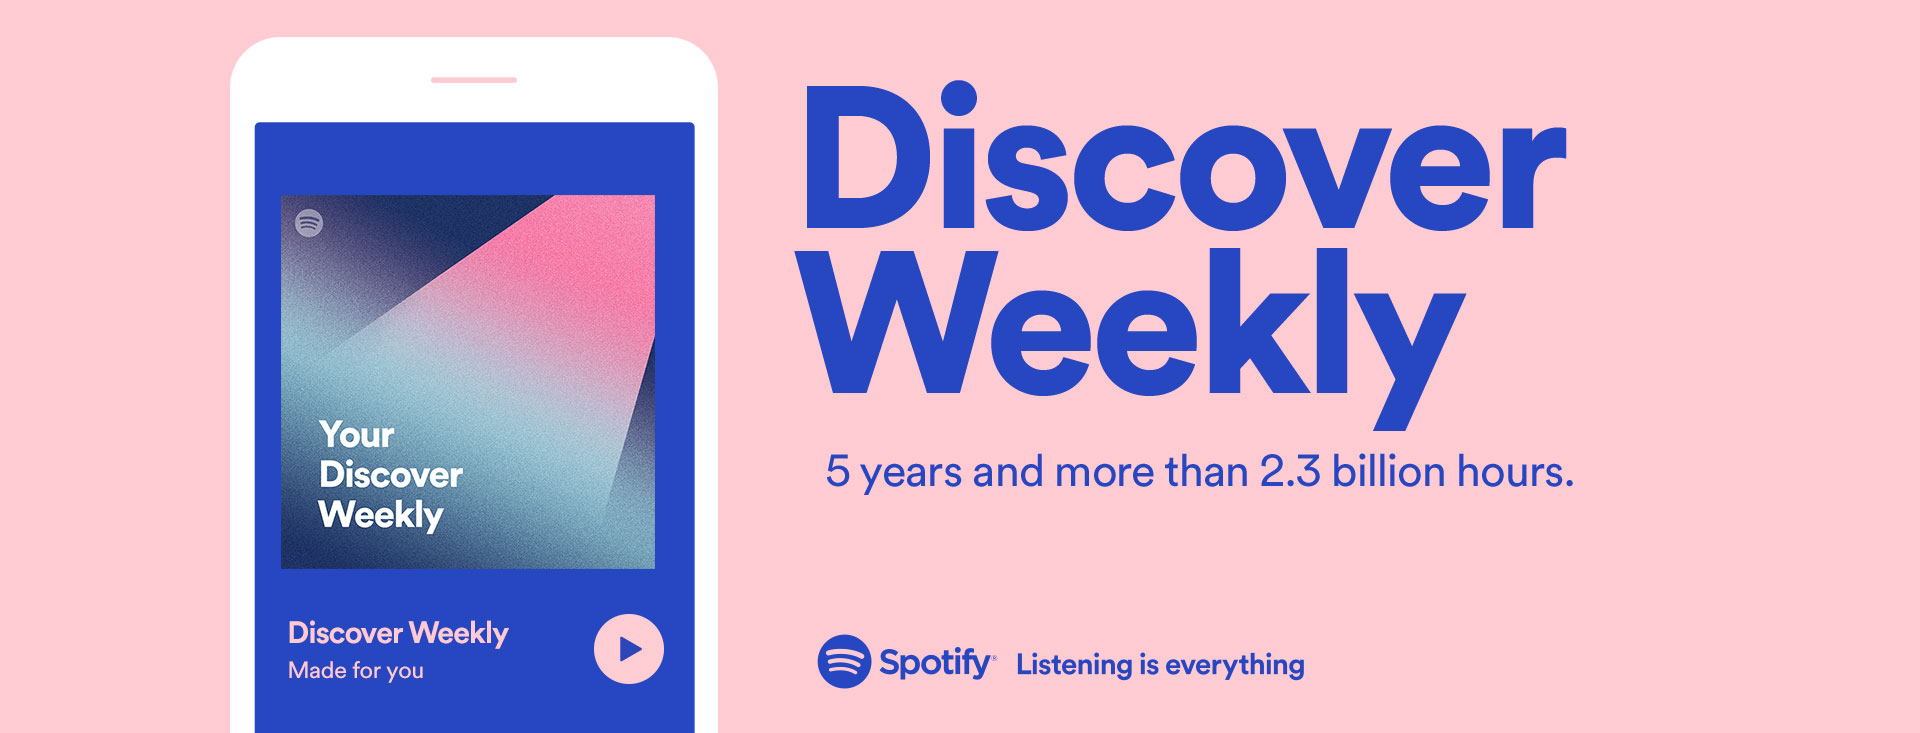 Spotify’s Discover Weekly playlist has been streamed for over 2.3 billion hours